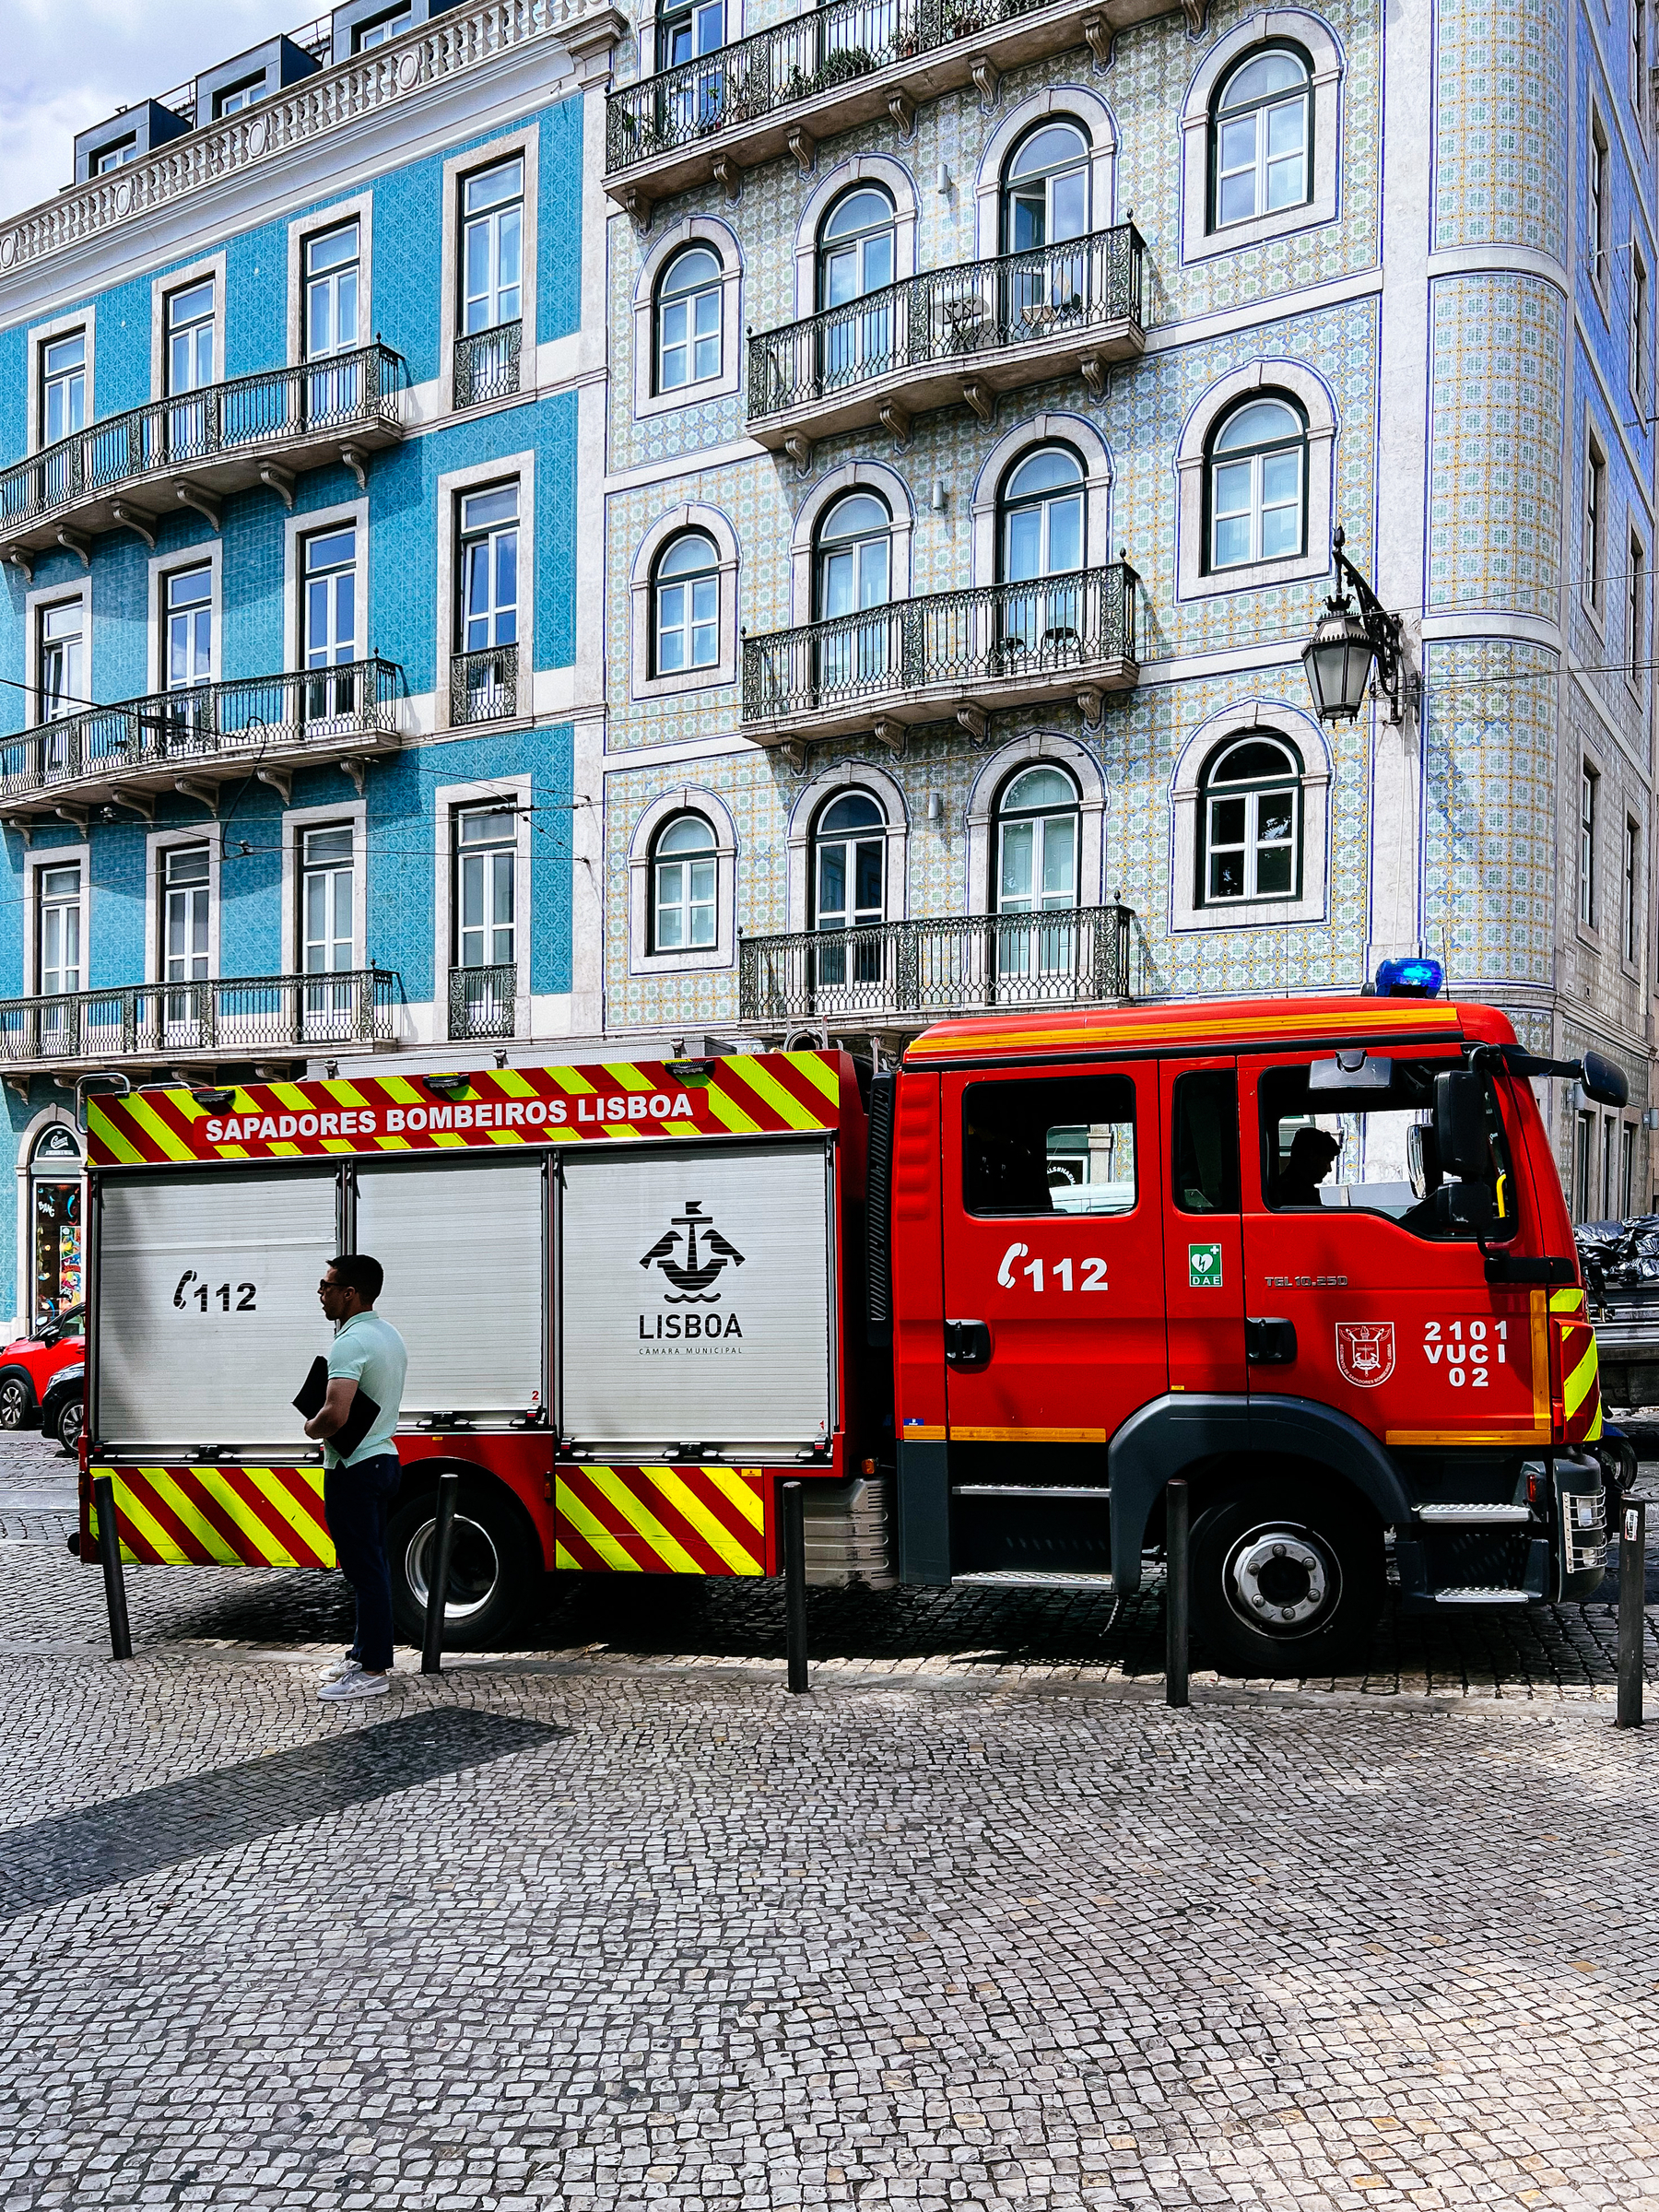 a firetruck parked in front of a classic Lisbon tile-covered building